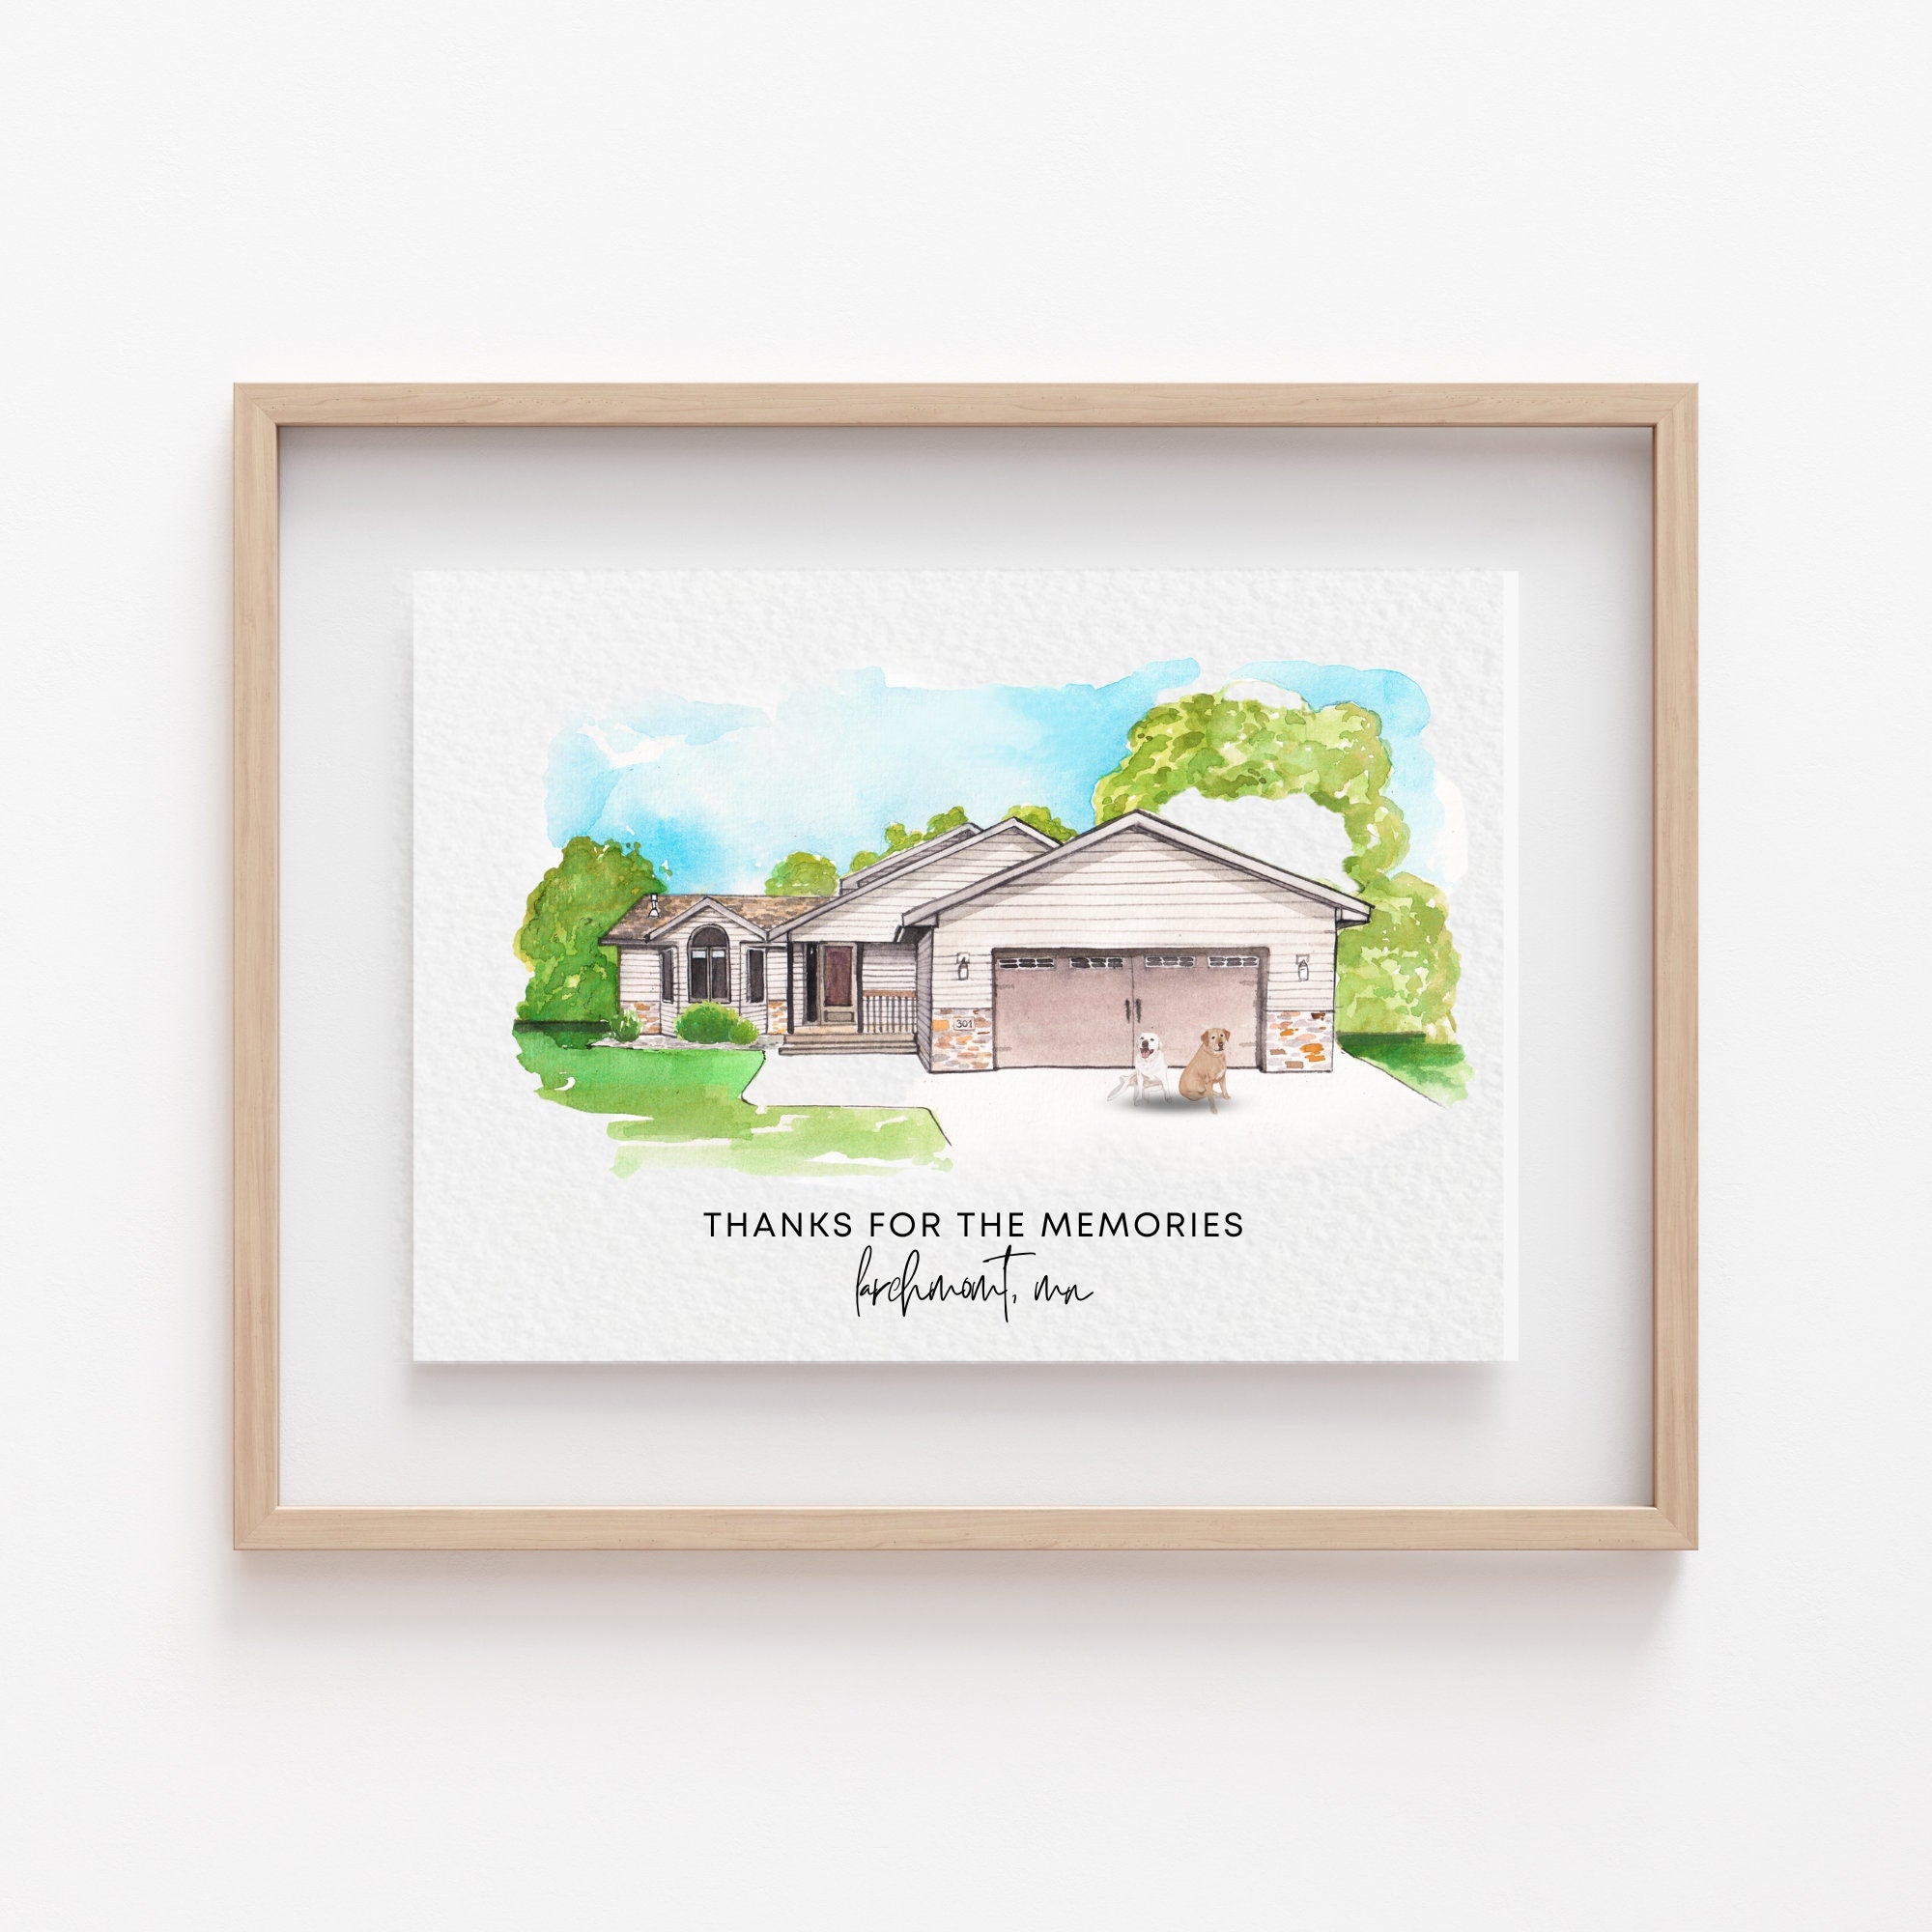 Custom Watercolor House Painting Print,House Painting From Photo,Housewarming gift, Realtor Closing Gift,First Home Gift